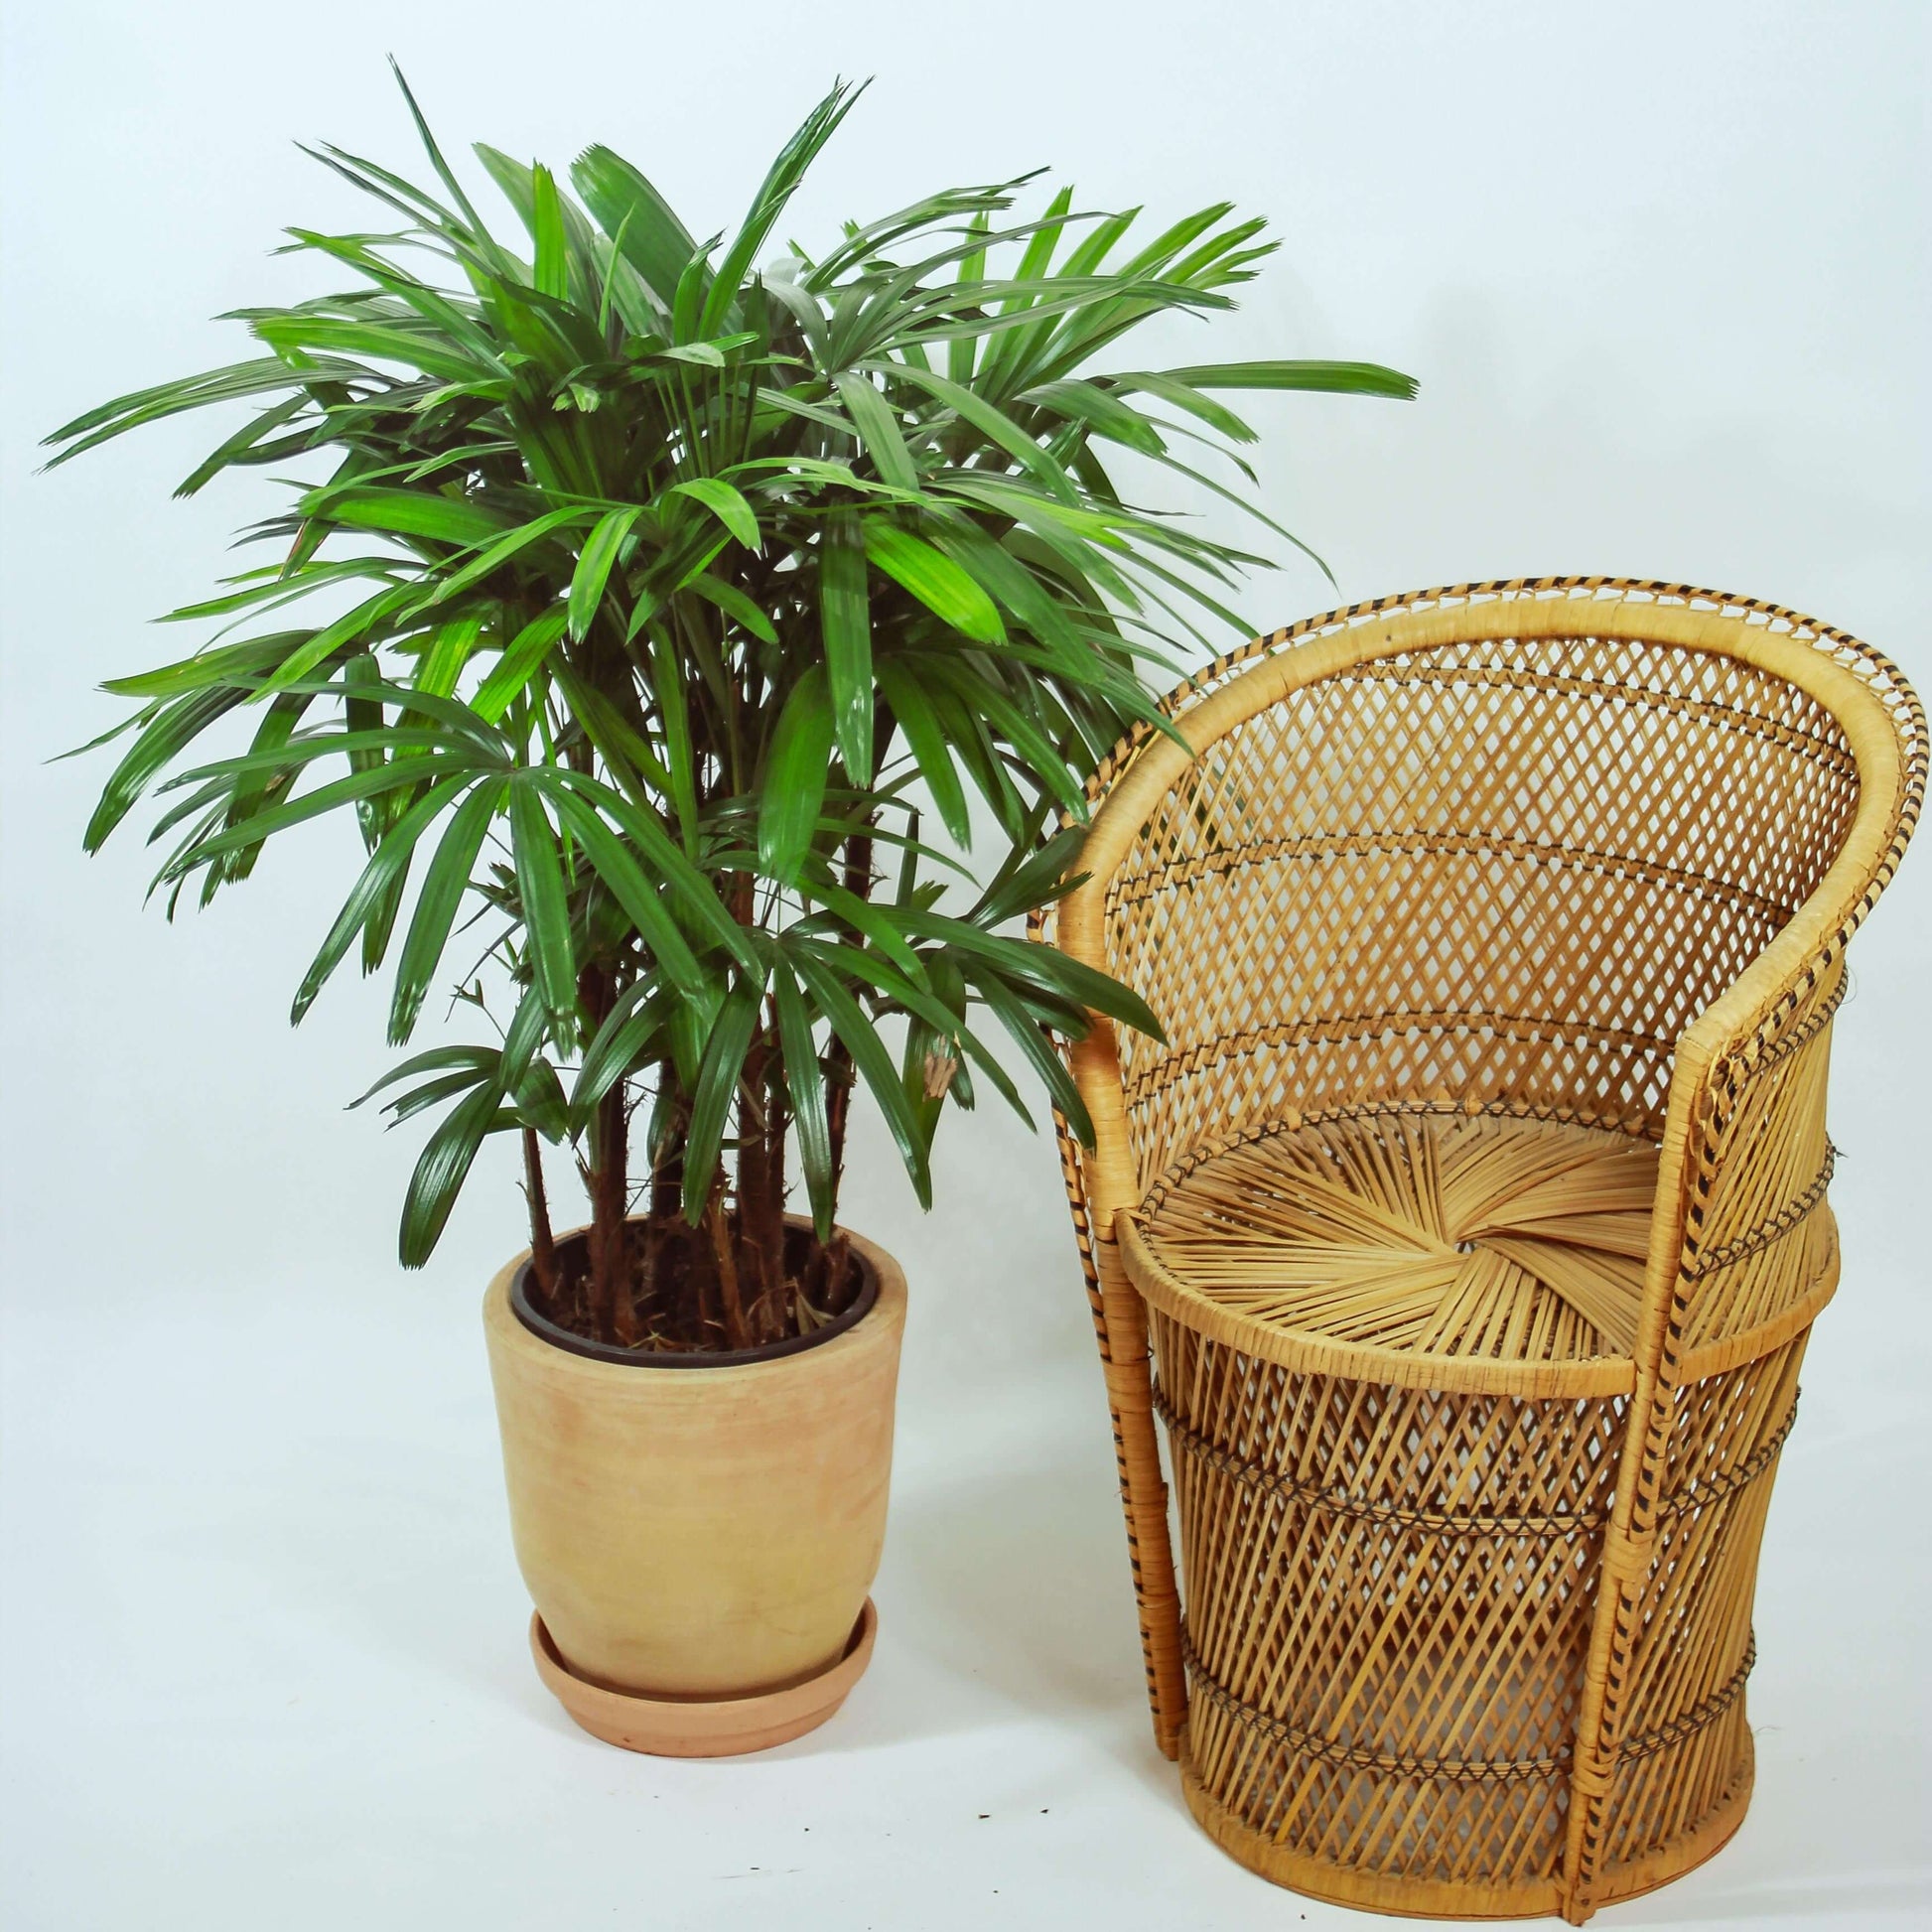 Lady Palm (Rhapis excelsa) in a 8 inch pot. Indoor plant for sale by Promise Supply for delivery and pickup in Toronto